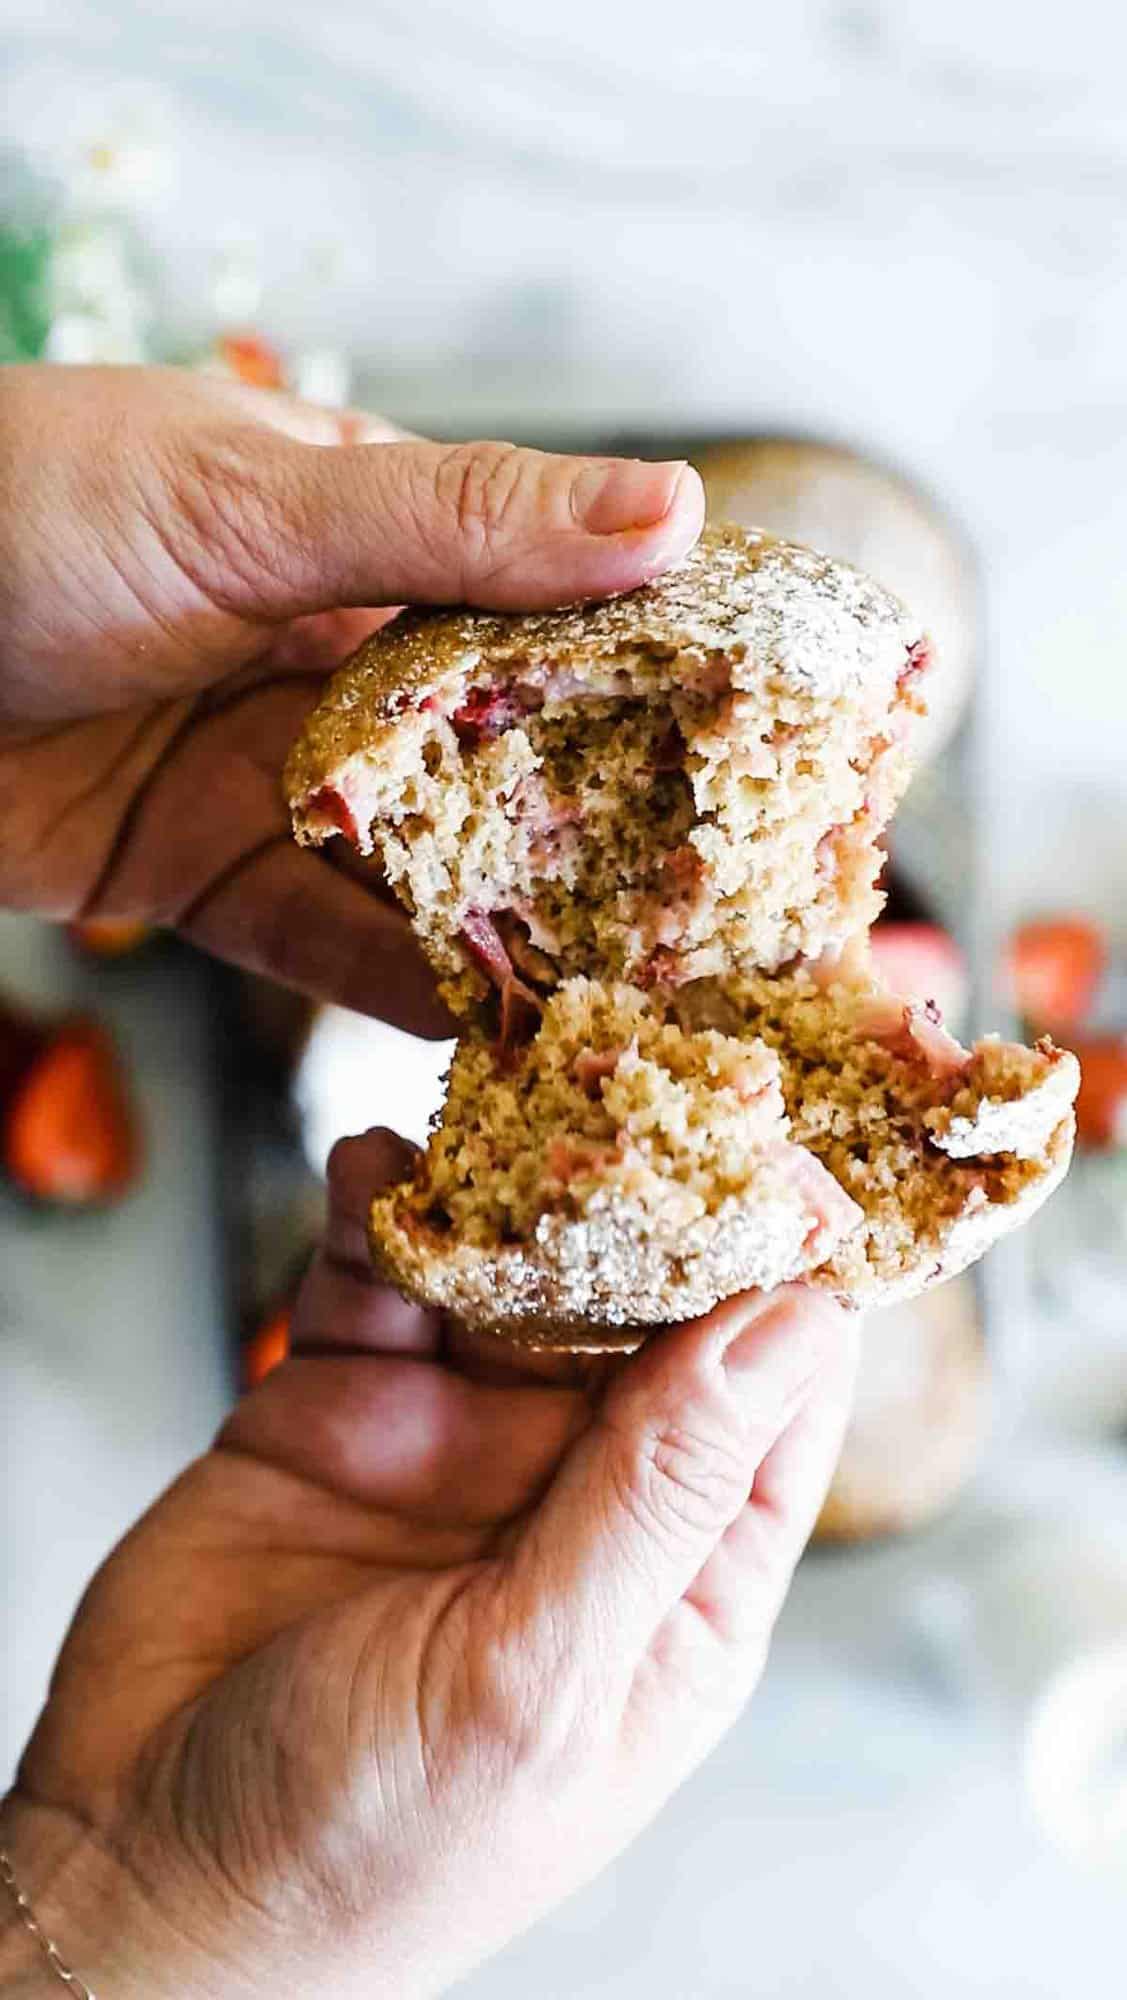 A healthy strawberry muffin being pulled apart.